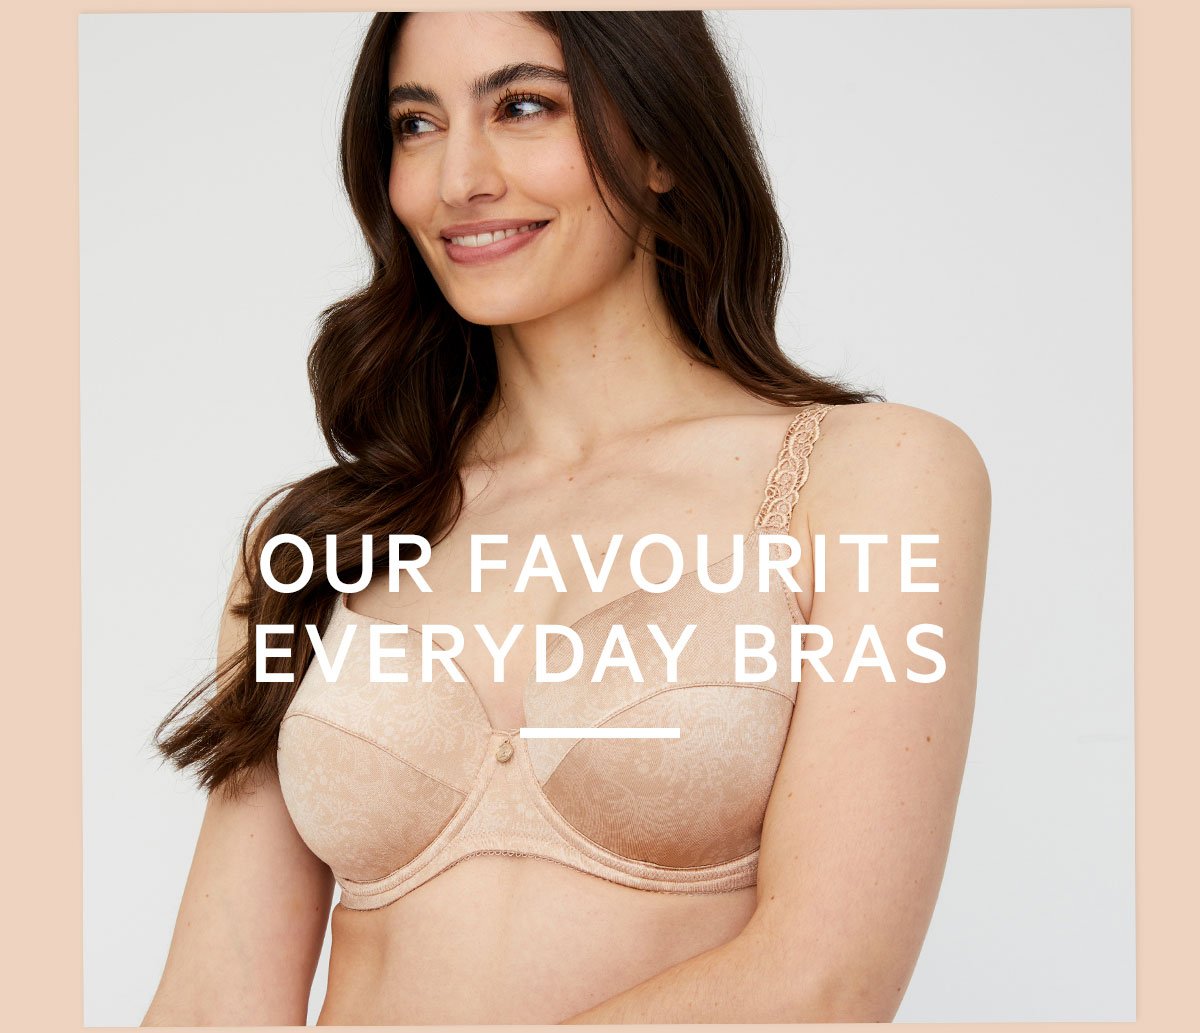 Our-Favourite-Everyday-Bras